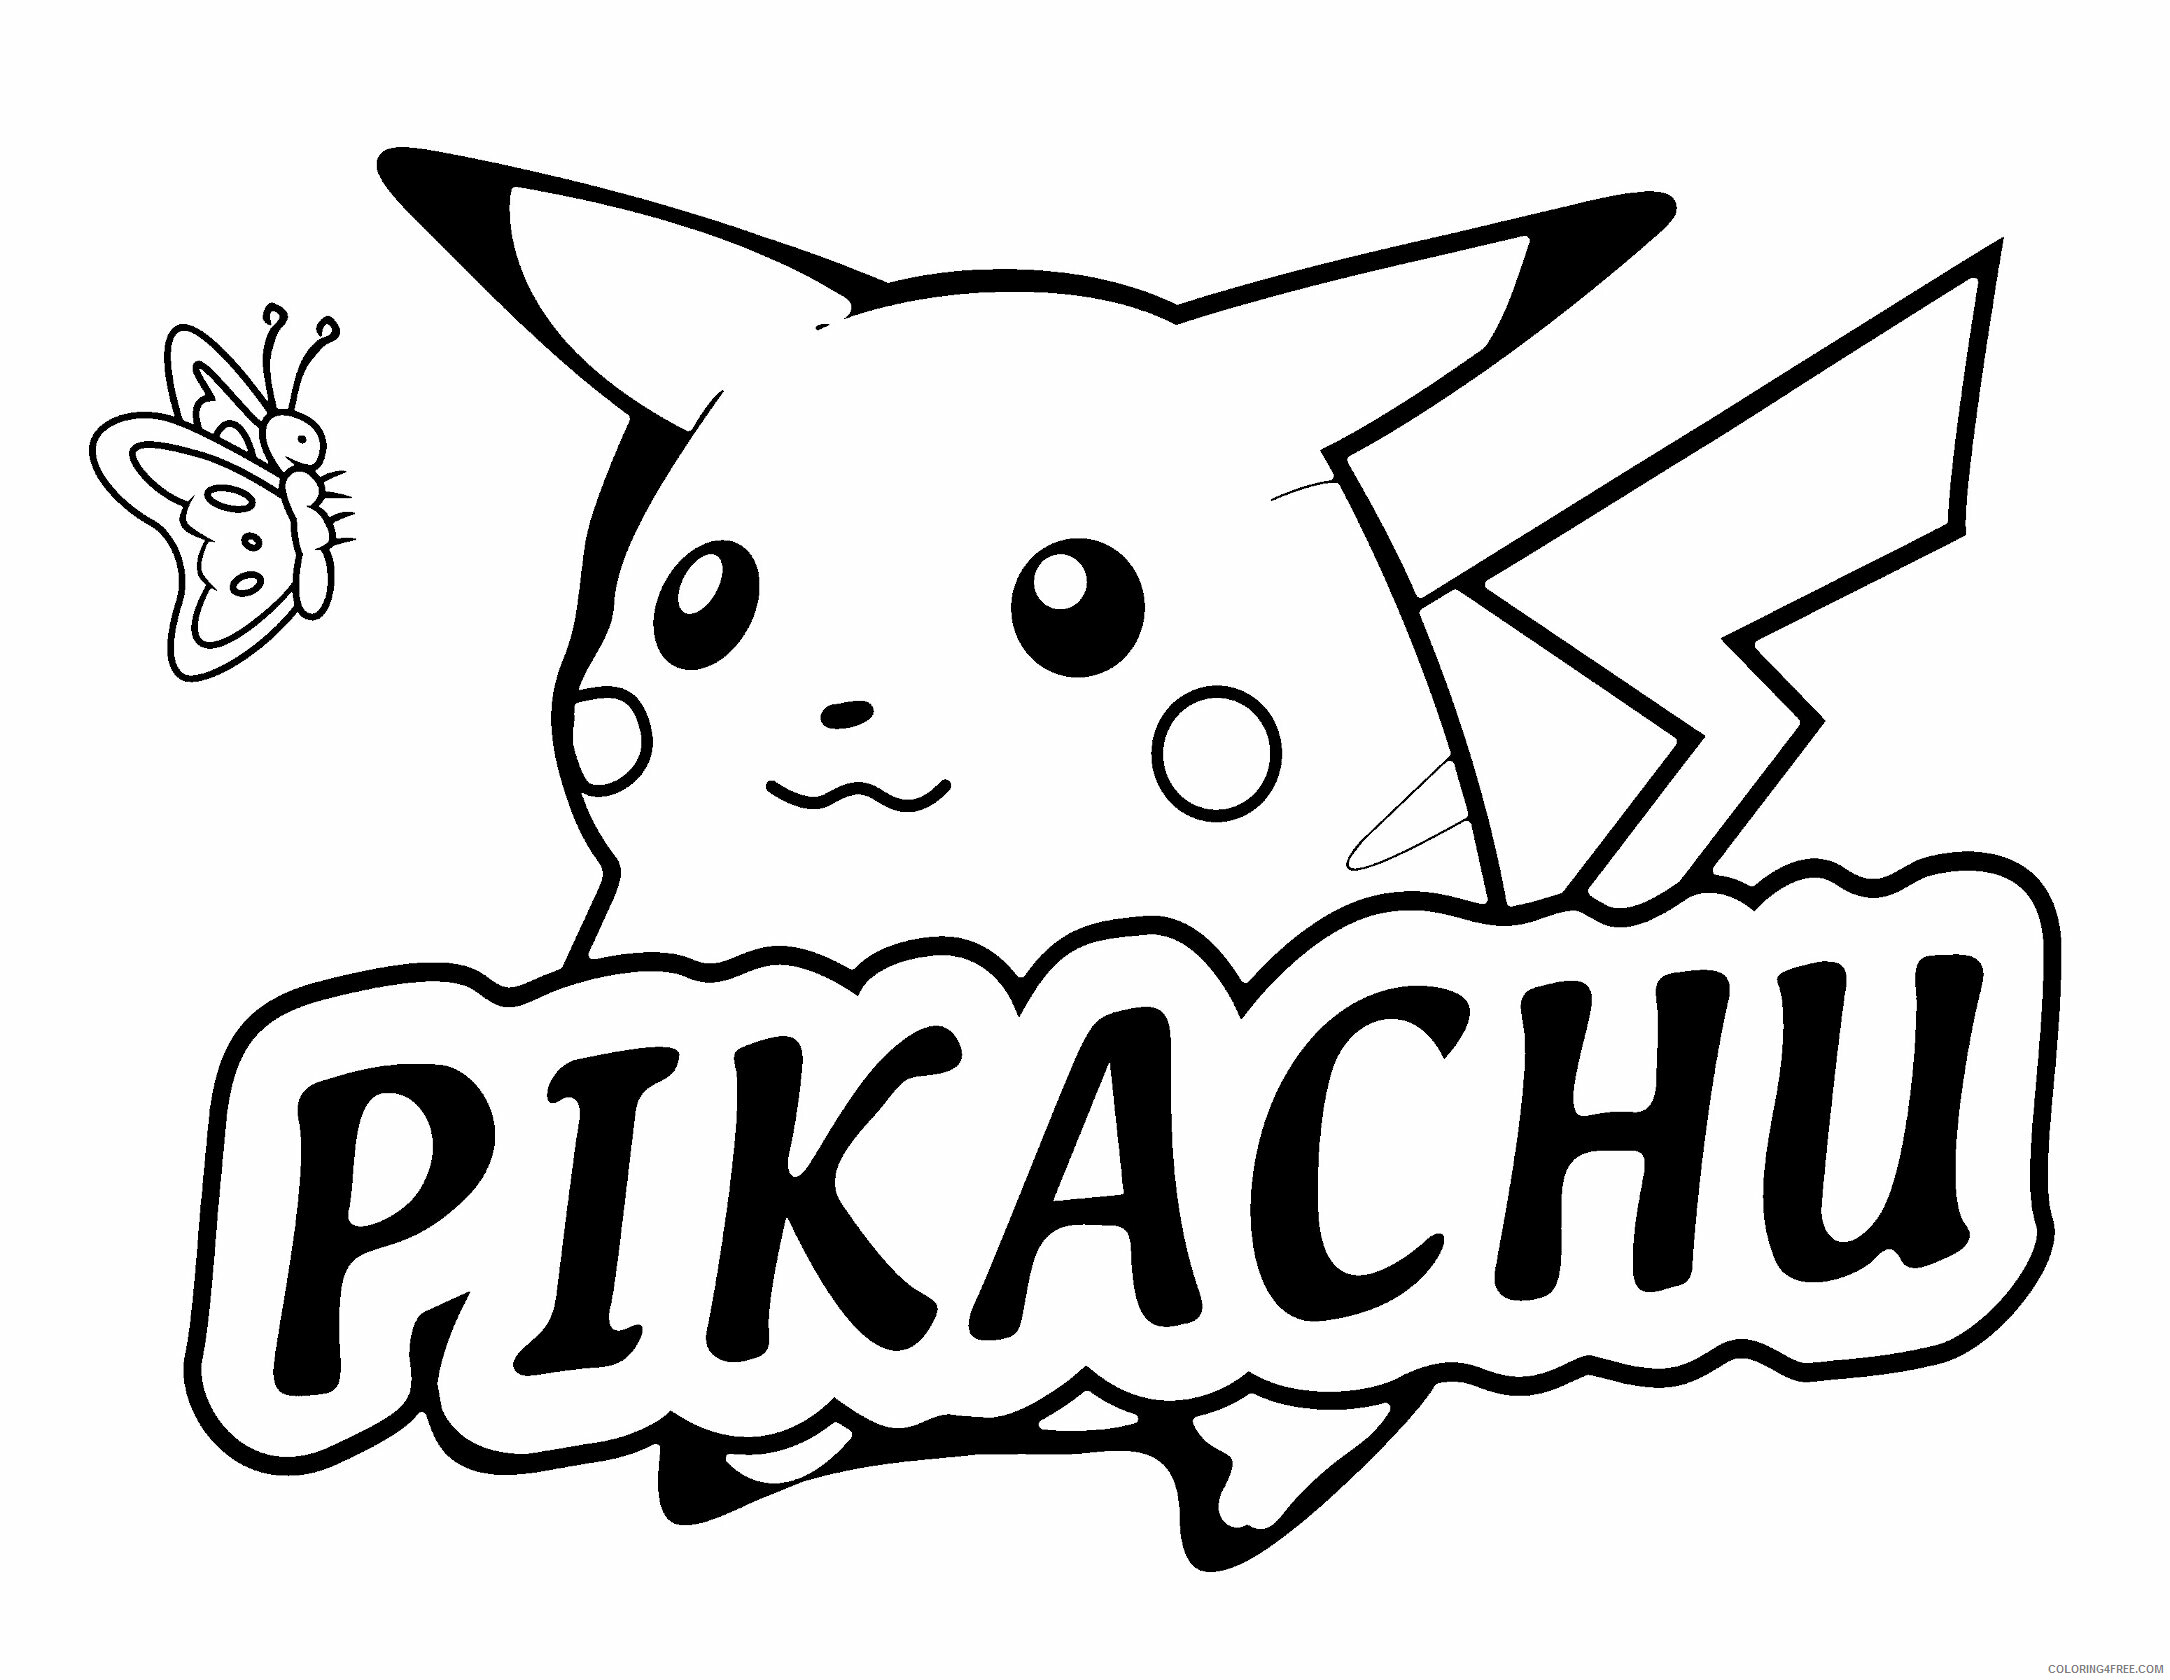 Pikachu Printable Coloring Pages Anime pokemon 68 2021 0959 Coloring4free